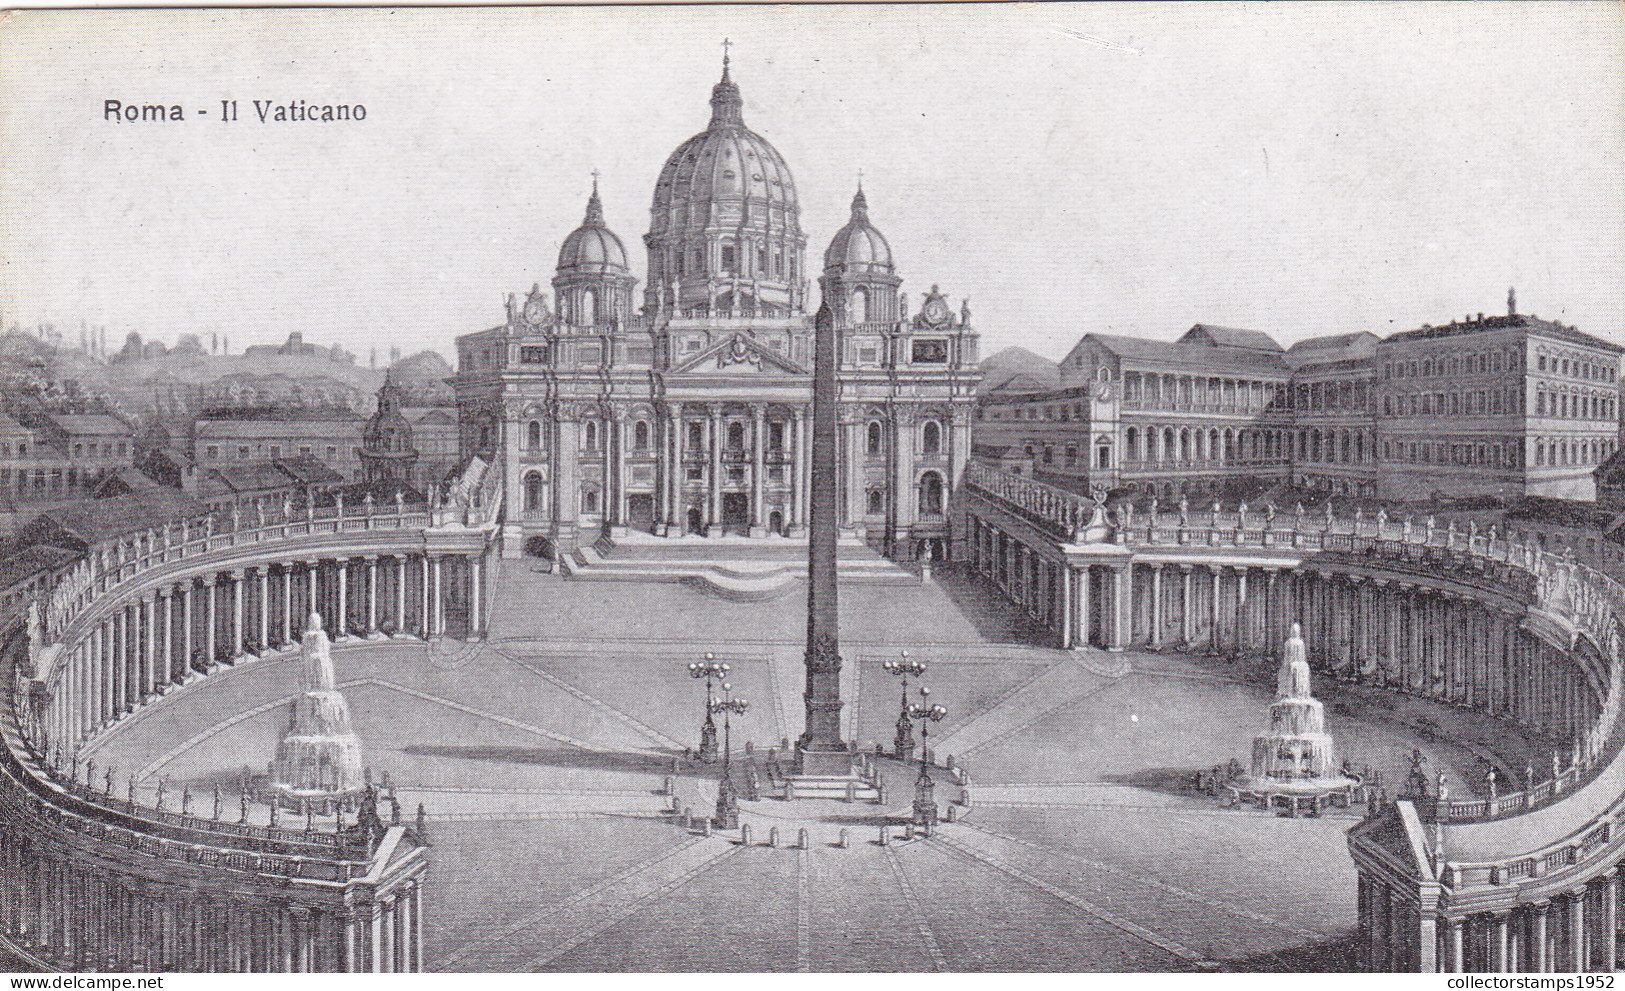 CPA - IL VATICANO, PANORAMA, THE CATHEDRAL, STATUES, BUILDINGS, ROME - ITALY - Mehransichten, Panoramakarten